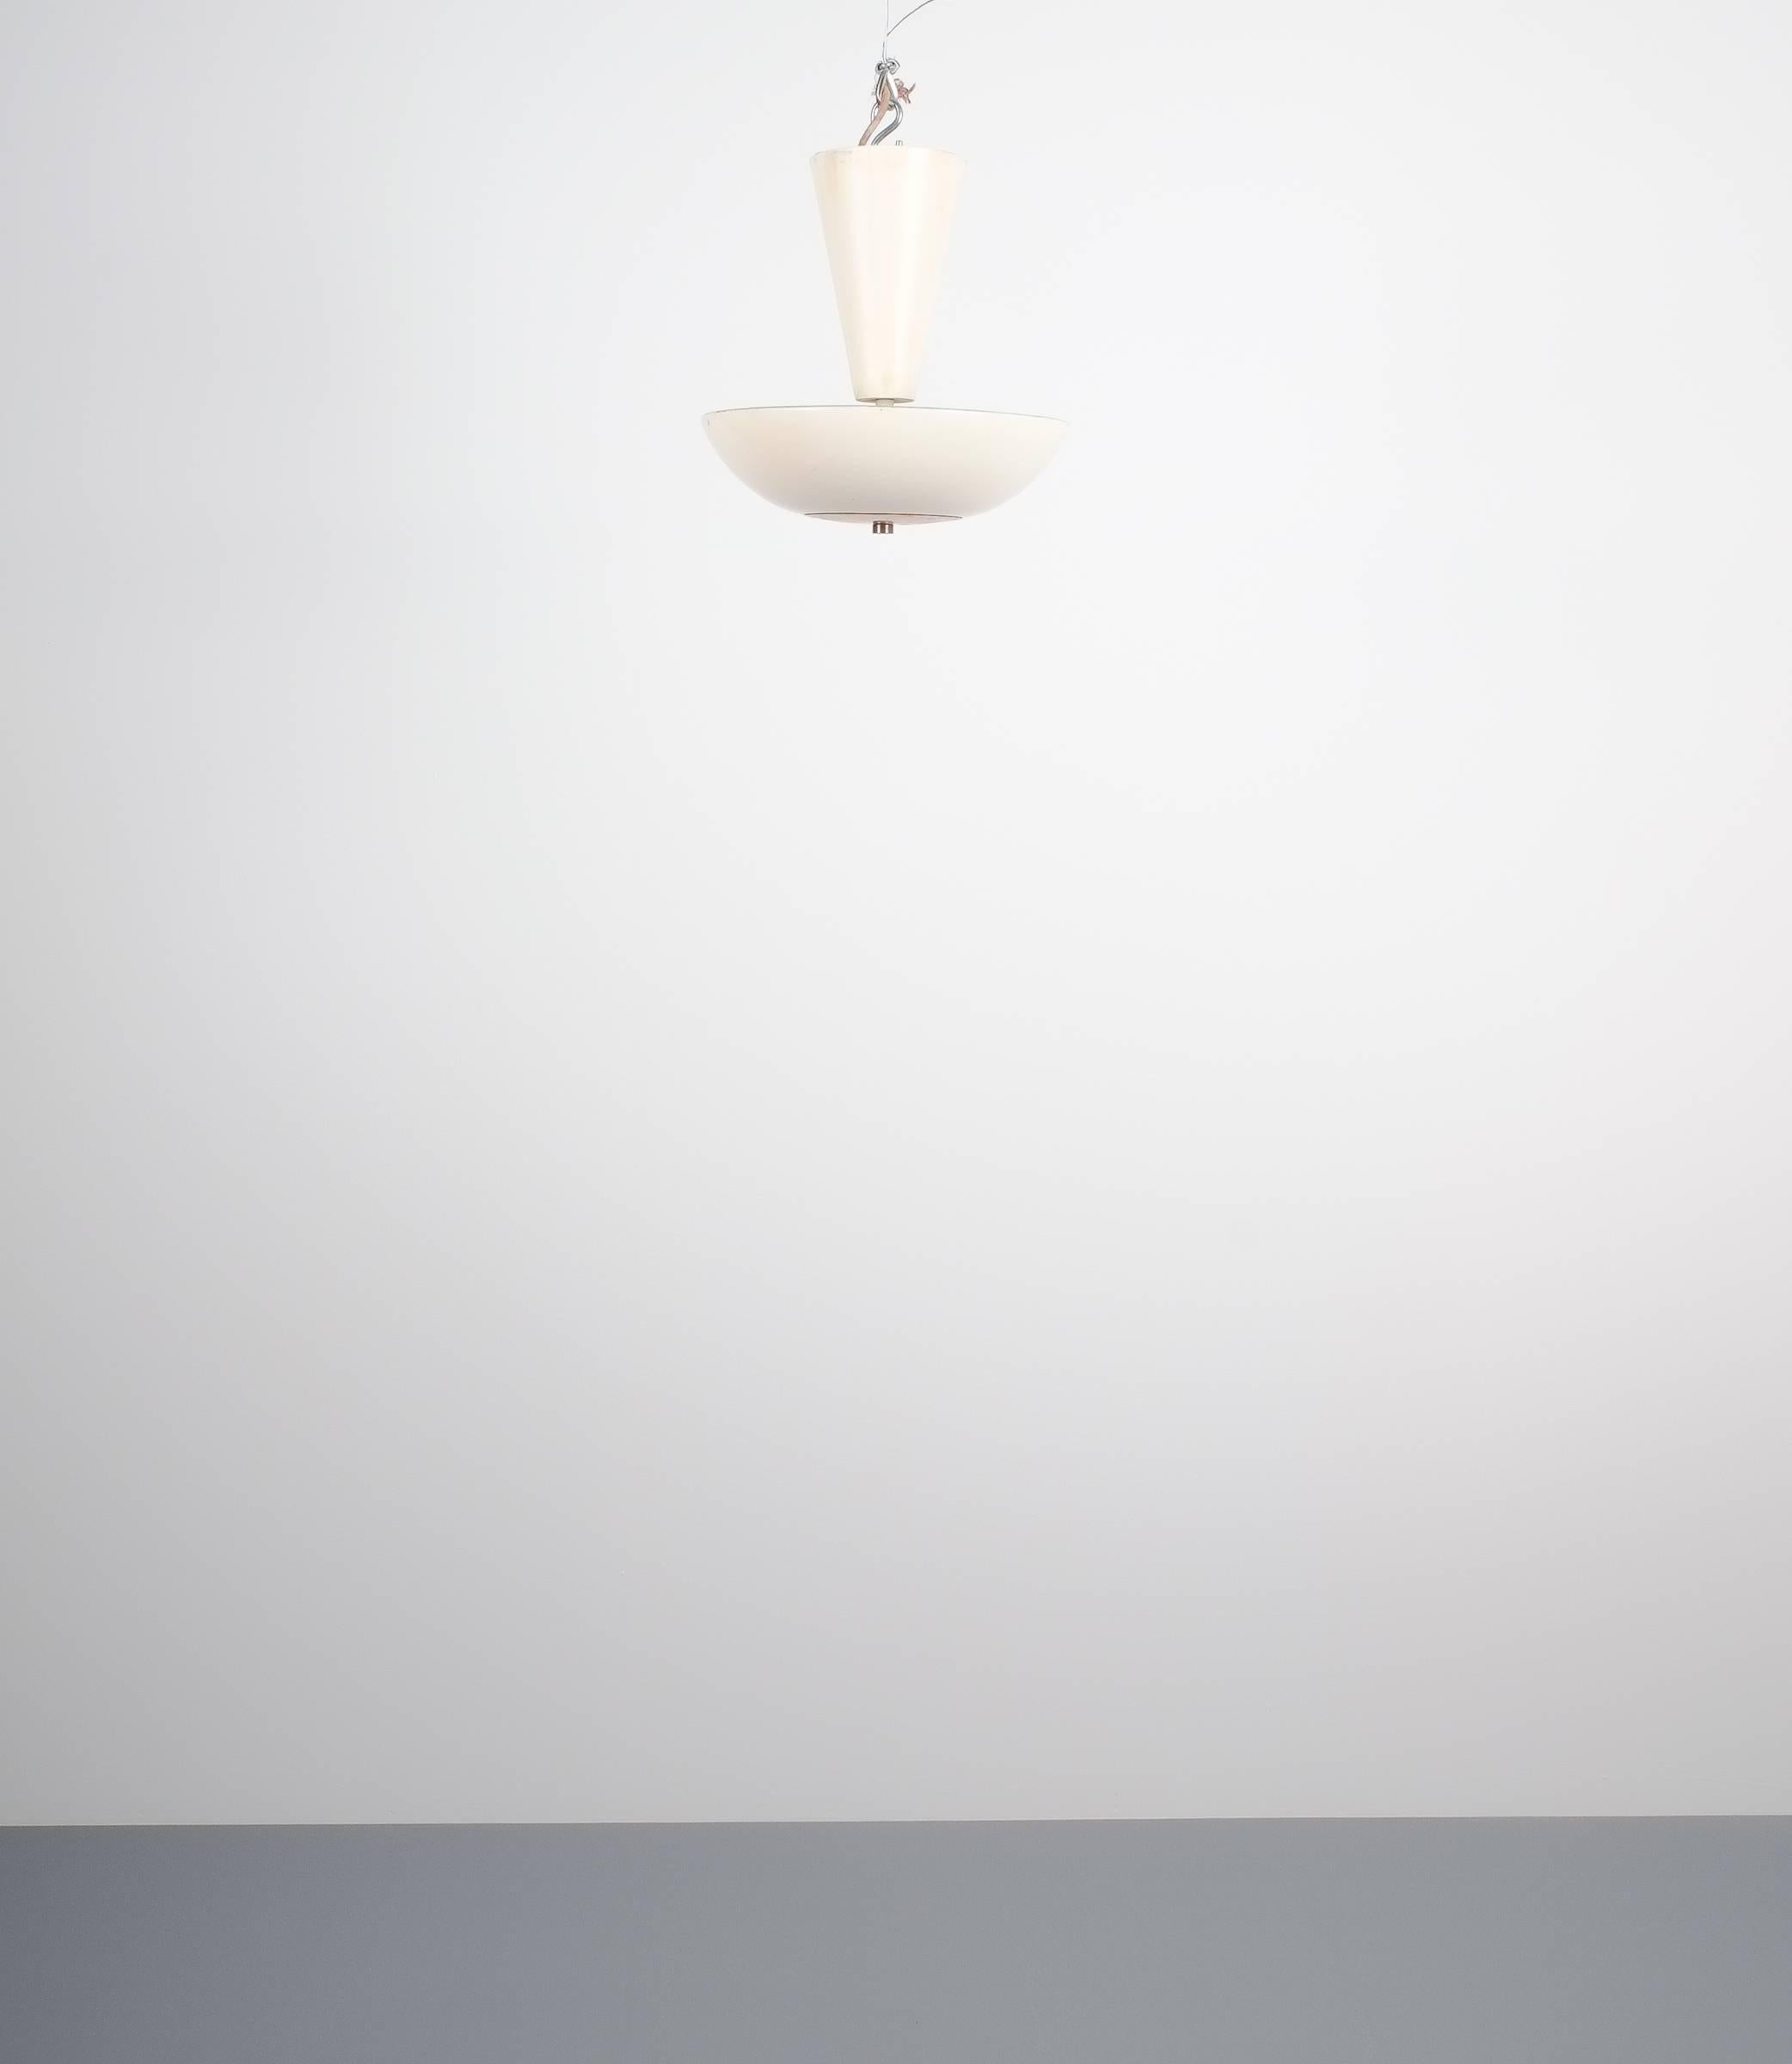 Gino Sarfatti Arteluce 2031 ceiling lamp or semi flush mount, Italy, 1950. Desirable white (egg-shell) painted aluminum light with brass accents in original condition (good condition with signs of wear) three x e27 bulbs are used with this light. We